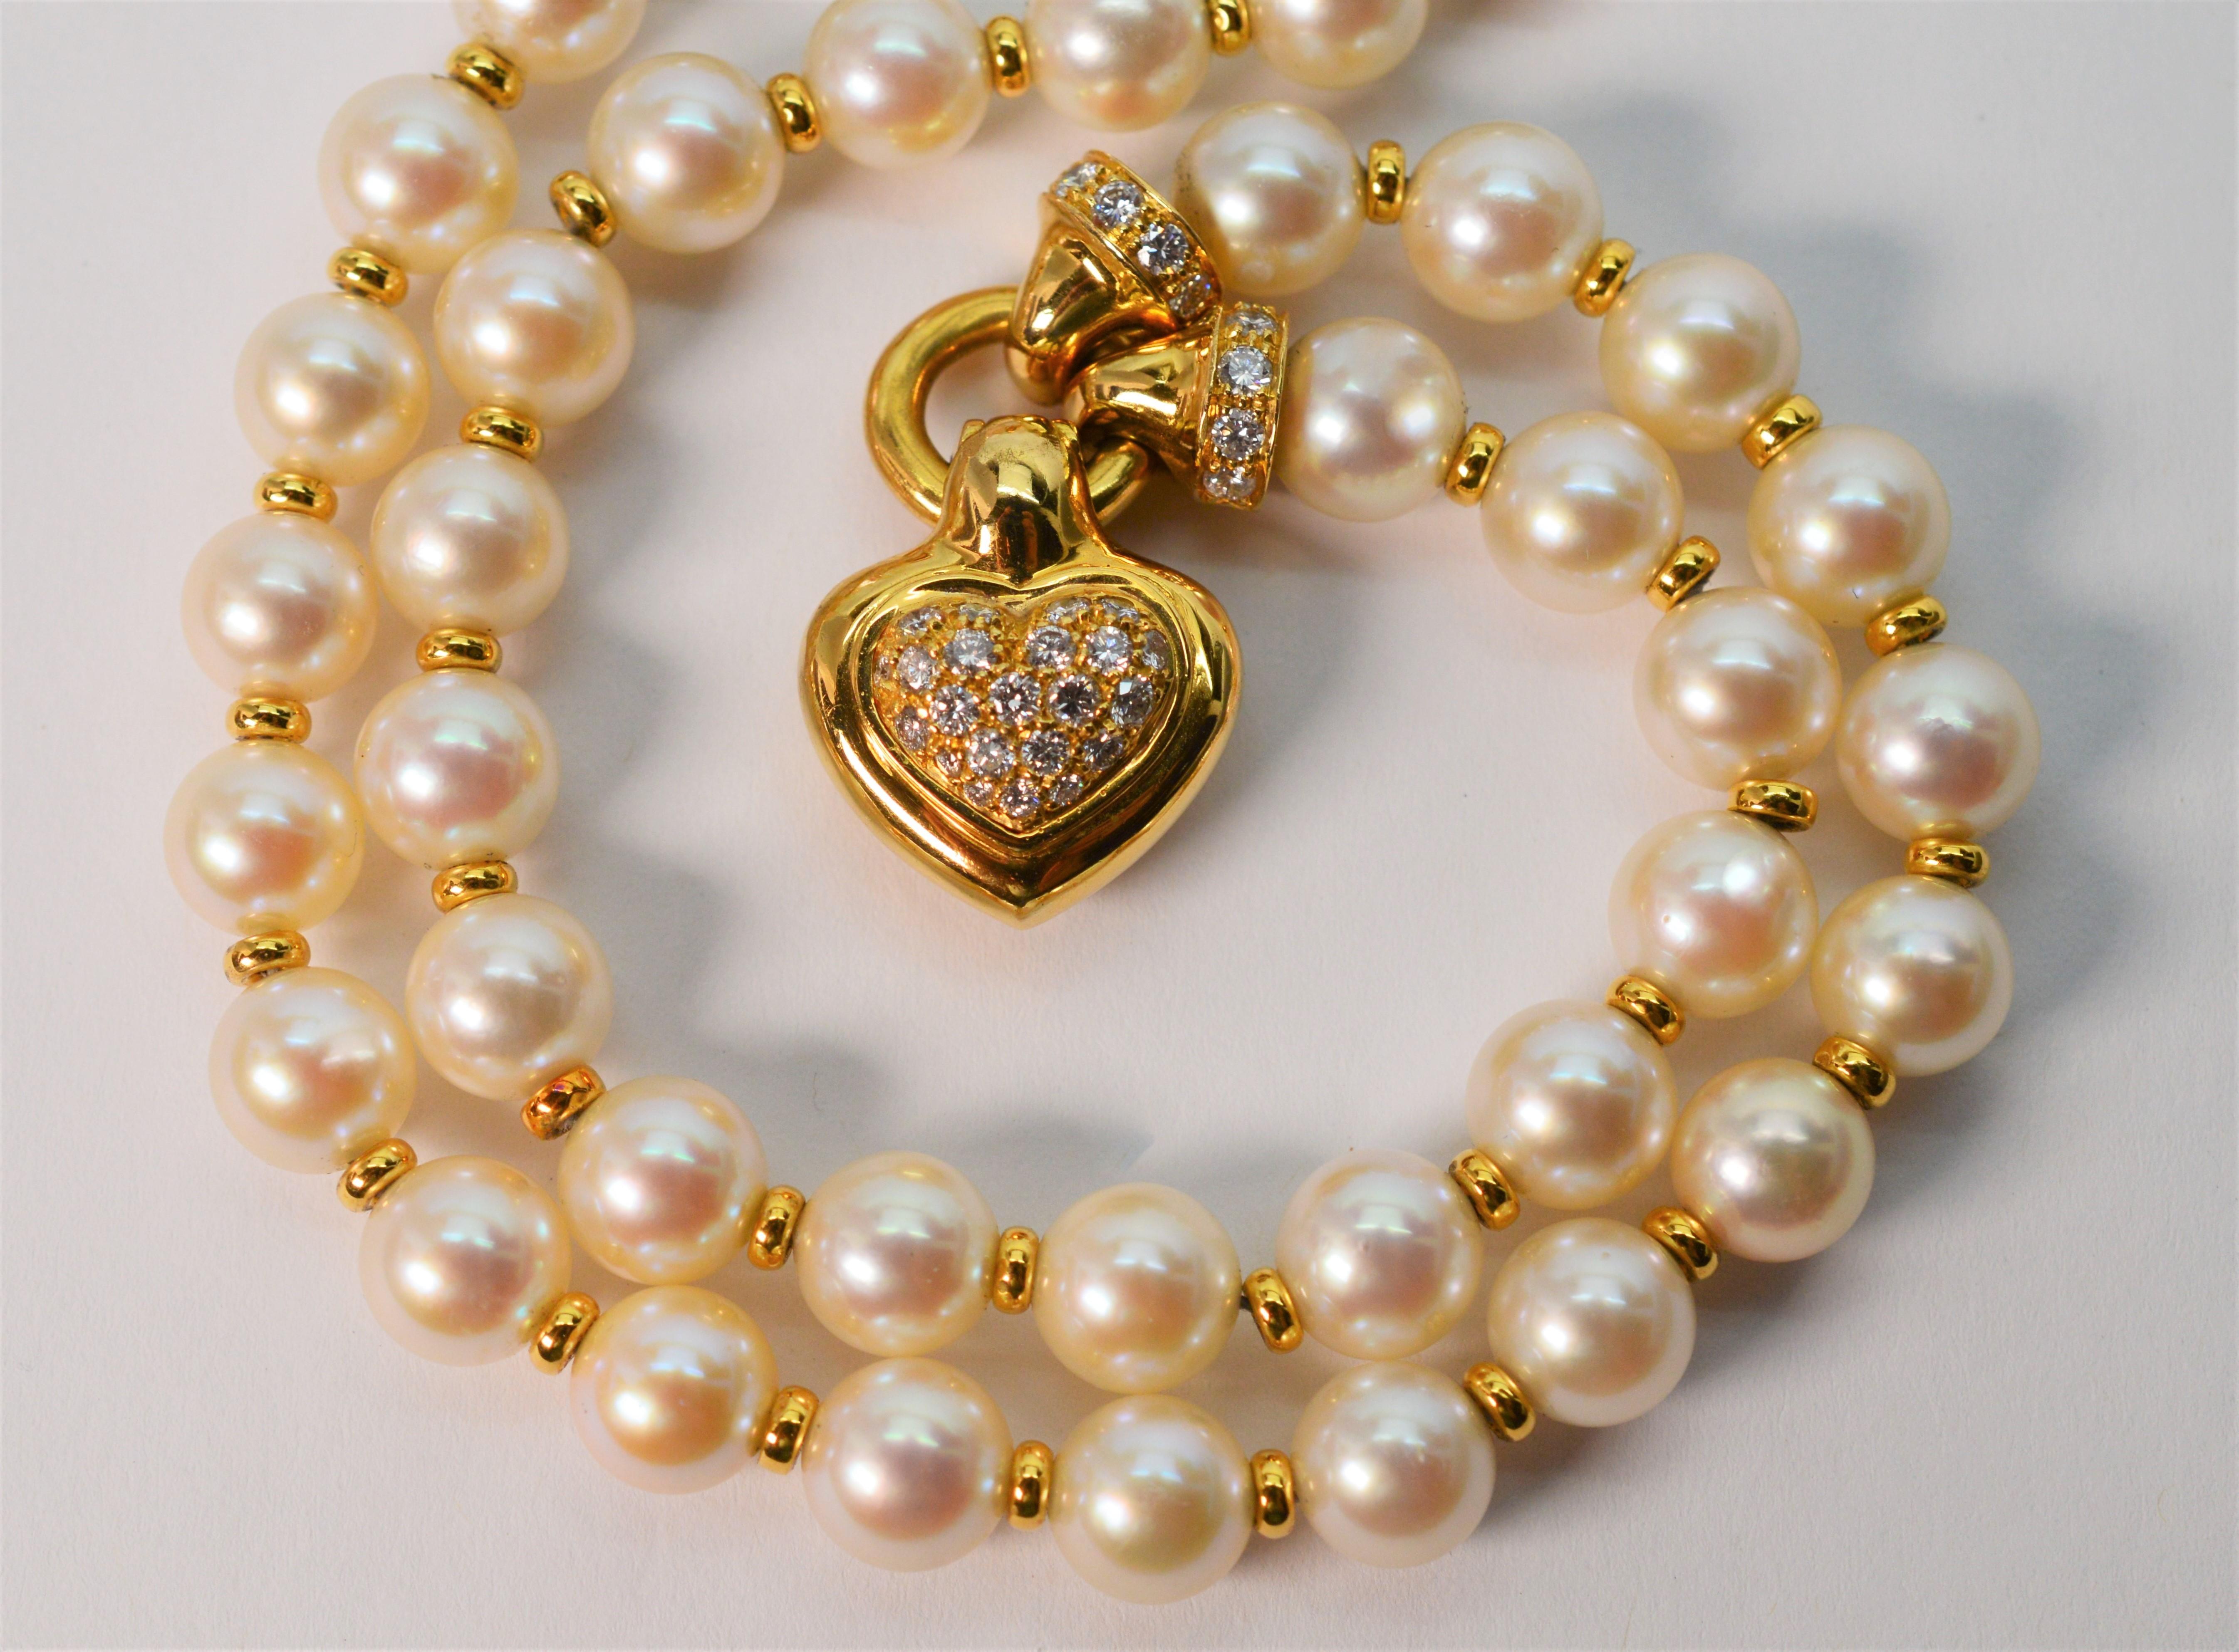 The marriage of classic elements creates versatility for this lovely pearl diamond heart charm pendant necklace. Perfect for special occasion outfits paired with your favorite earrings or great for a flirty glam look with a crisp white collar shirt